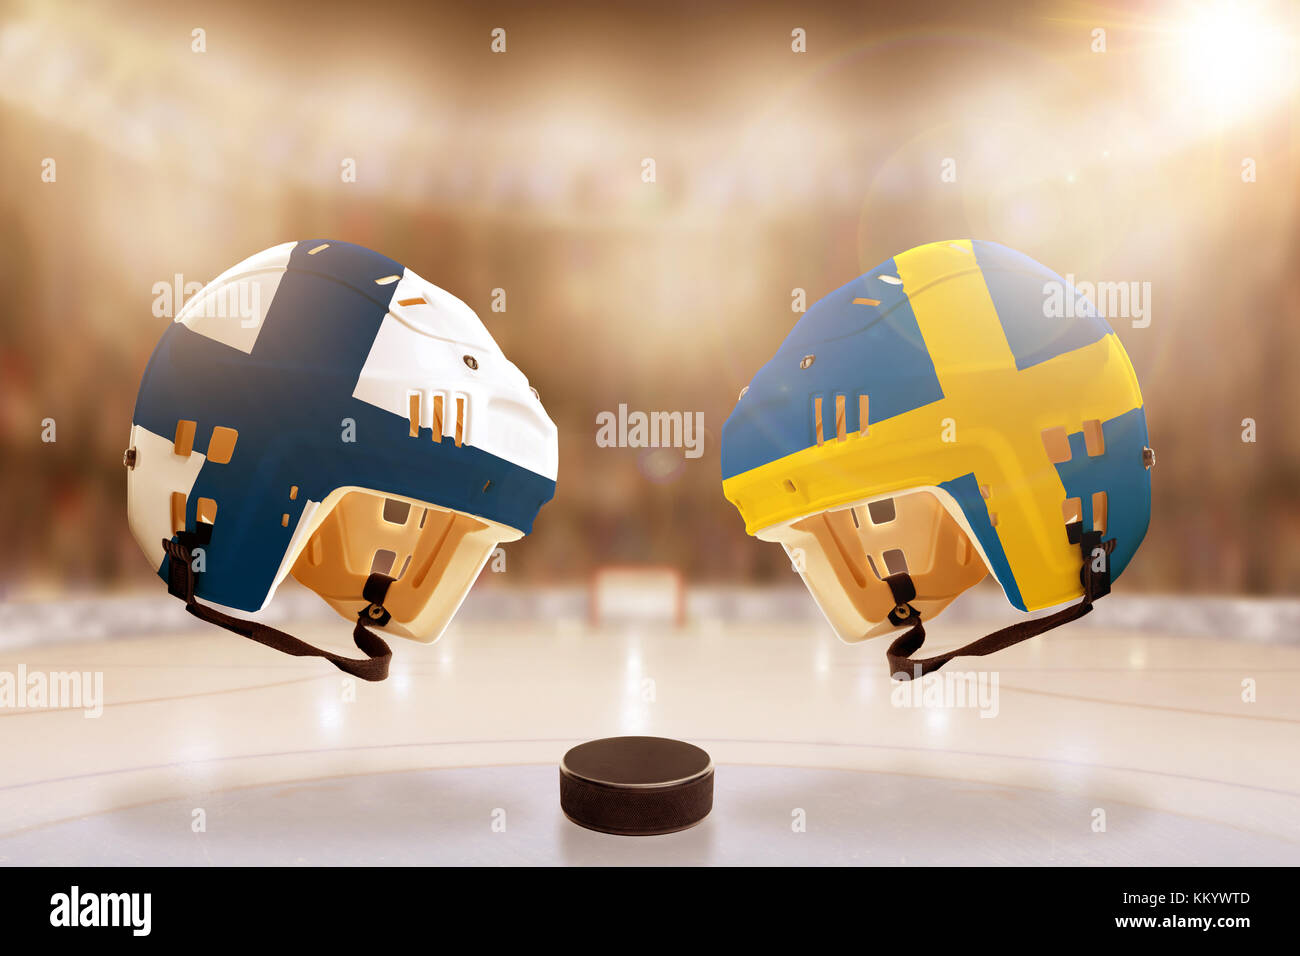 Low angle view of hockey helmets with Finland and Sweden flags painted and hockey puck on ice in brightly lit stadium background. Concept of intense r Stock Photo